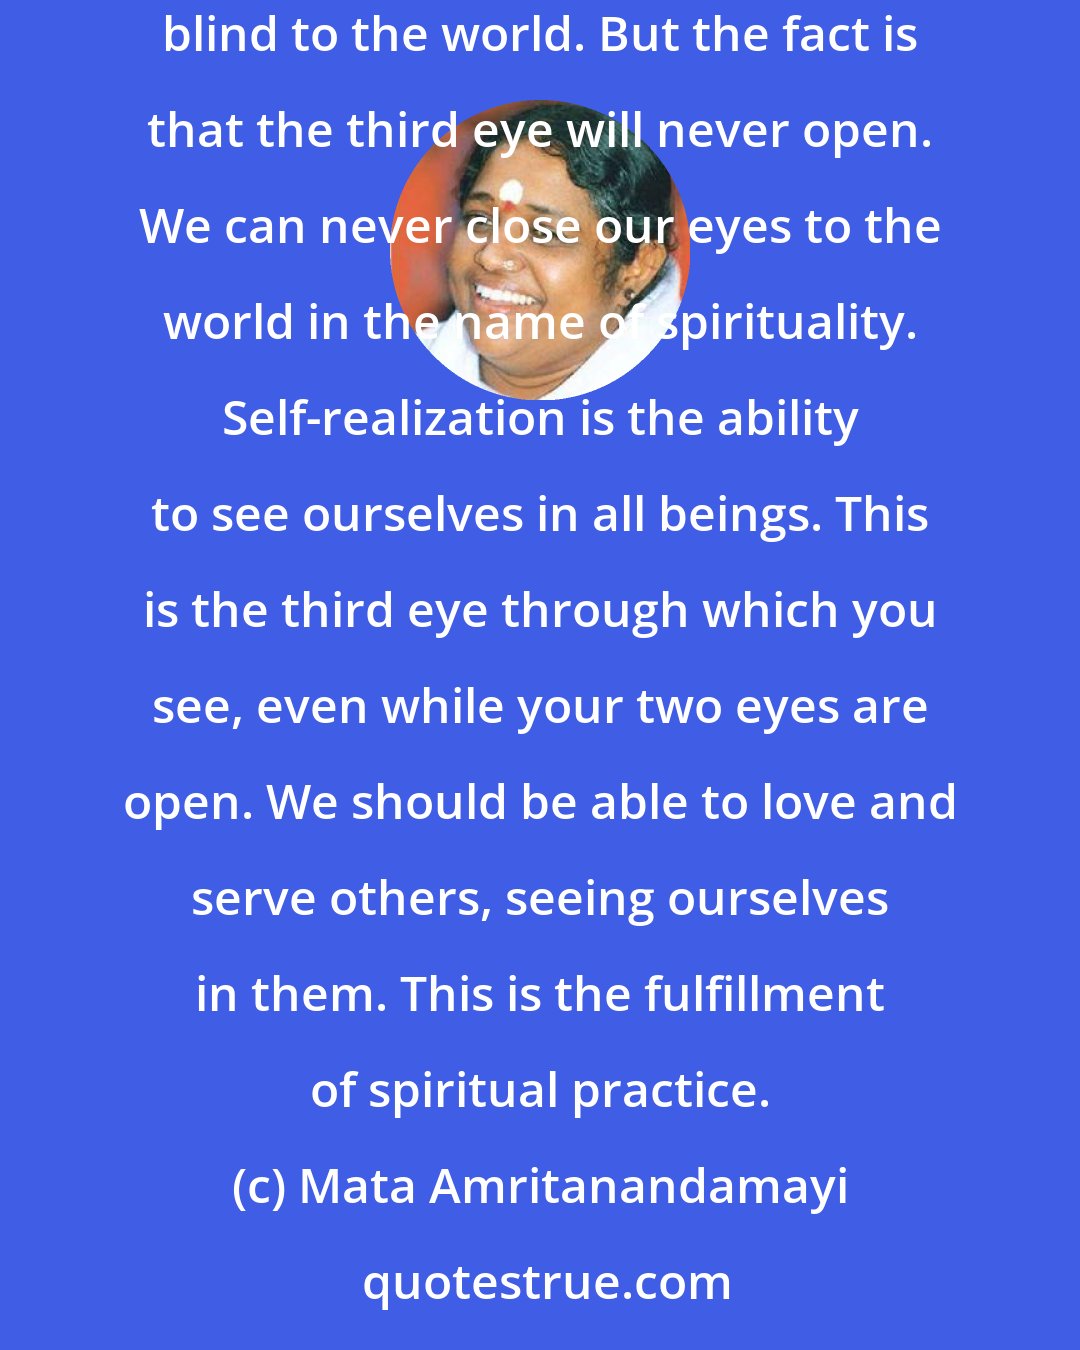 Mata Amritanandamayi: Many people meditate in order that a third eye may open. For that they feel they should close their two physical eyes. They thereby become blind to the world. But the fact is that the third eye will never open. We can never close our eyes to the world in the name of spirituality. Self-realization is the ability to see ourselves in all beings. This is the third eye through which you see, even while your two eyes are open. We should be able to love and serve others, seeing ourselves in them. This is the fulfillment of spiritual practice.